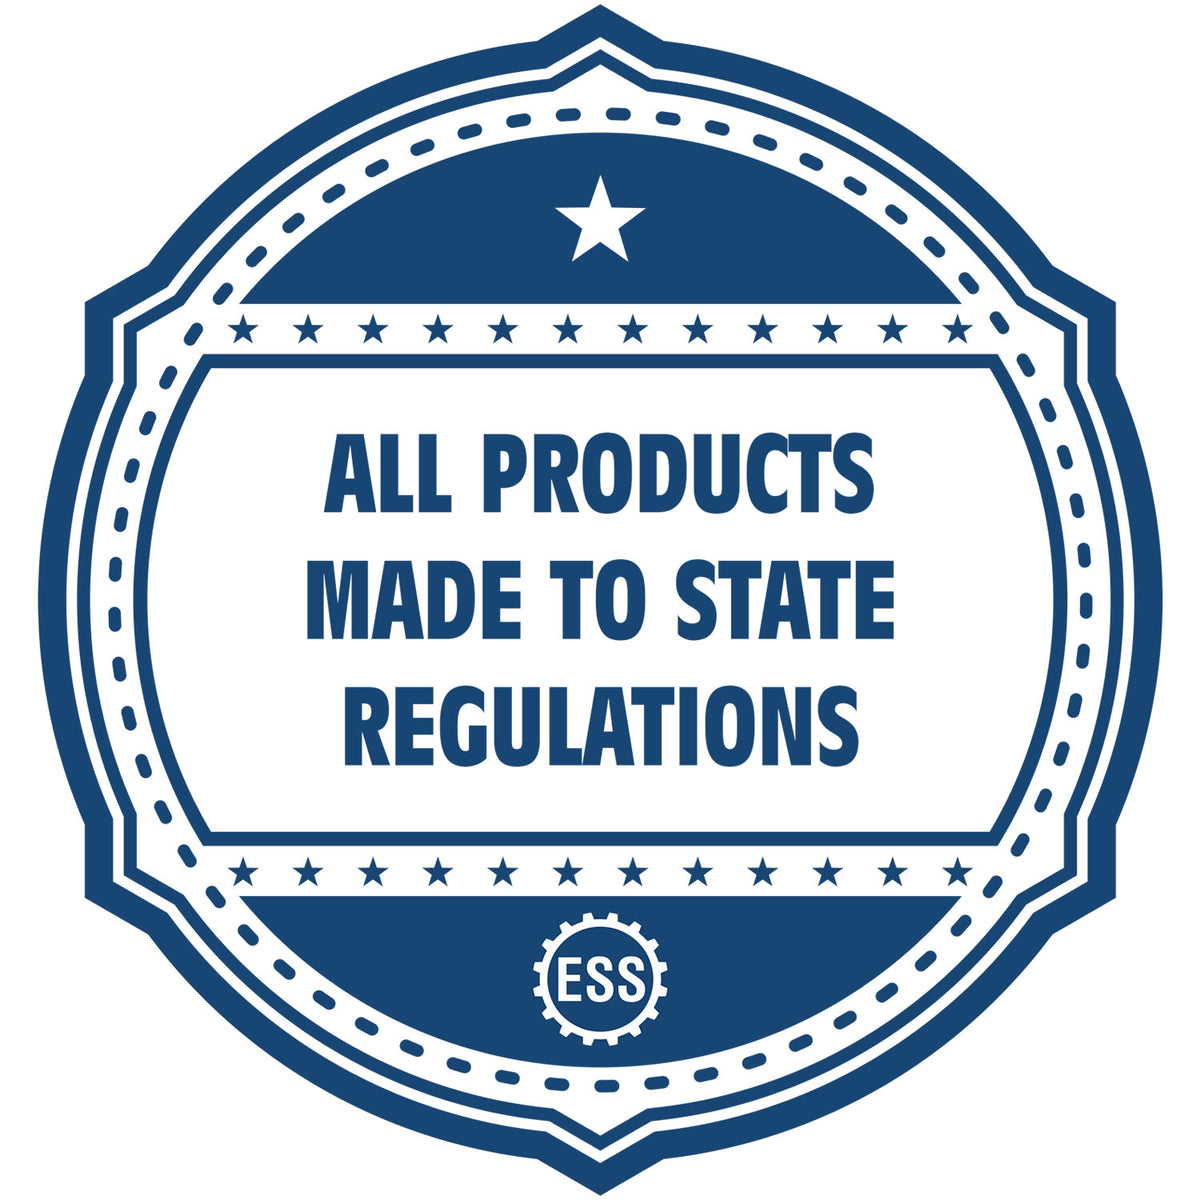 A blue icon or badge for the Tennessee Professional Geologist Seal Stamp showing that this product is made in compliance with state regulations.